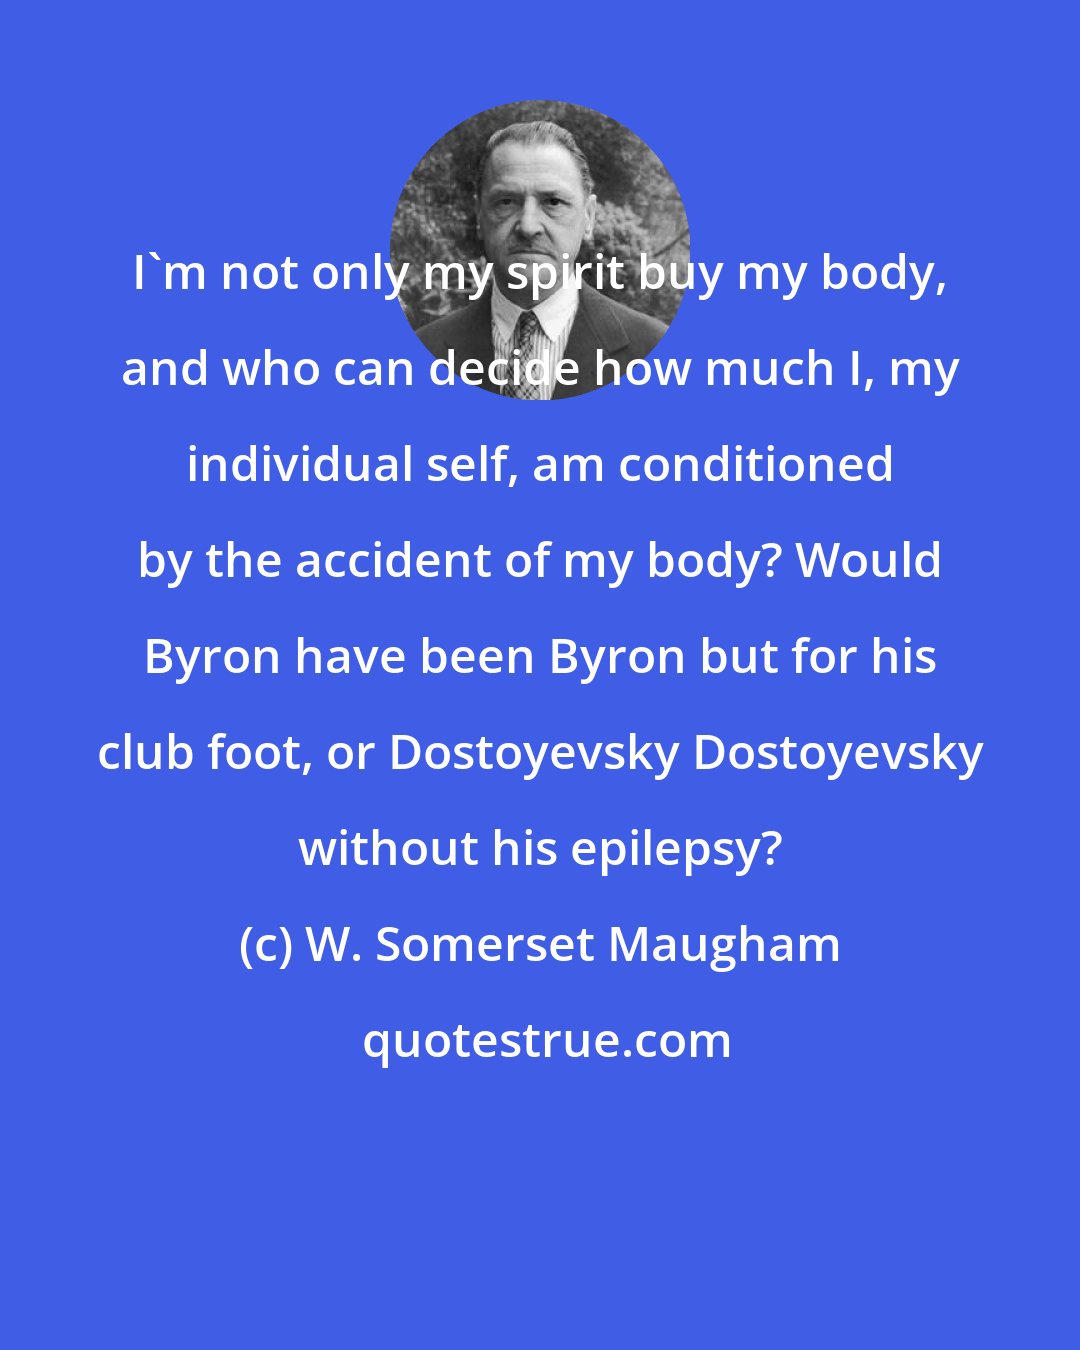 W. Somerset Maugham: I'm not only my spirit buy my body, and who can decide how much I, my individual self, am conditioned by the accident of my body? Would Byron have been Byron but for his club foot, or Dostoyevsky Dostoyevsky without his epilepsy?